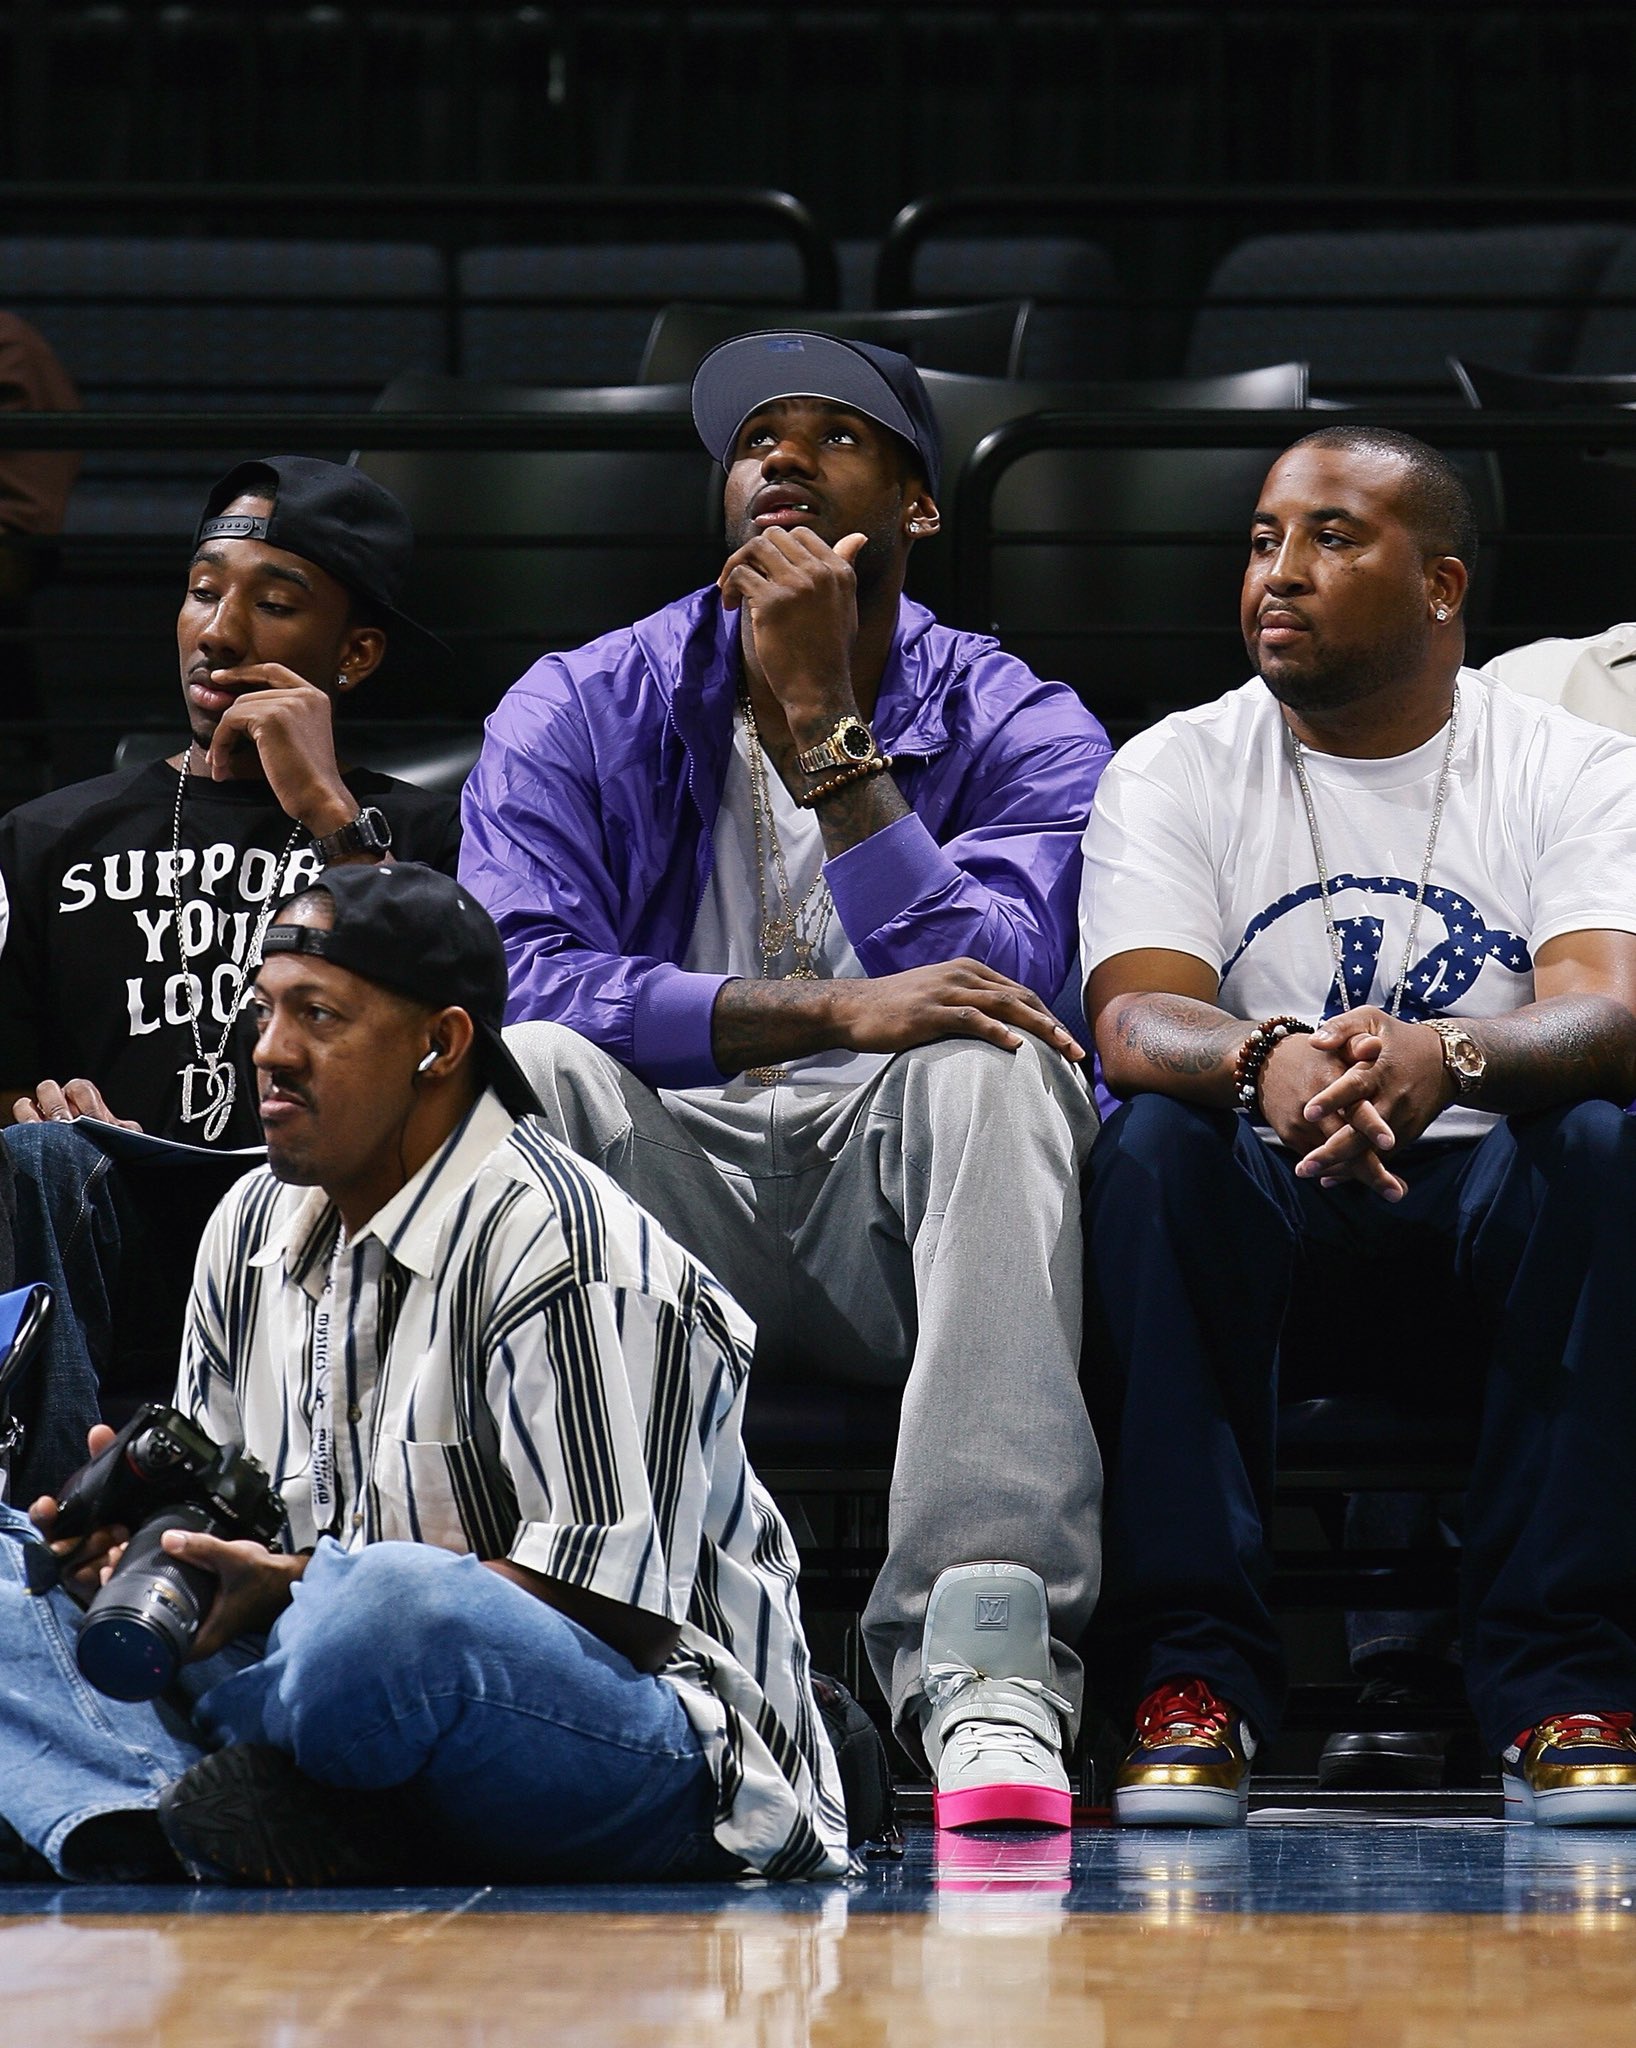 B/R Kicks on X: .@KingJames wearing the @KanyeWest x Louis Vuitton Jasper  on August 14, 2009 while watching a WNBA game  / X